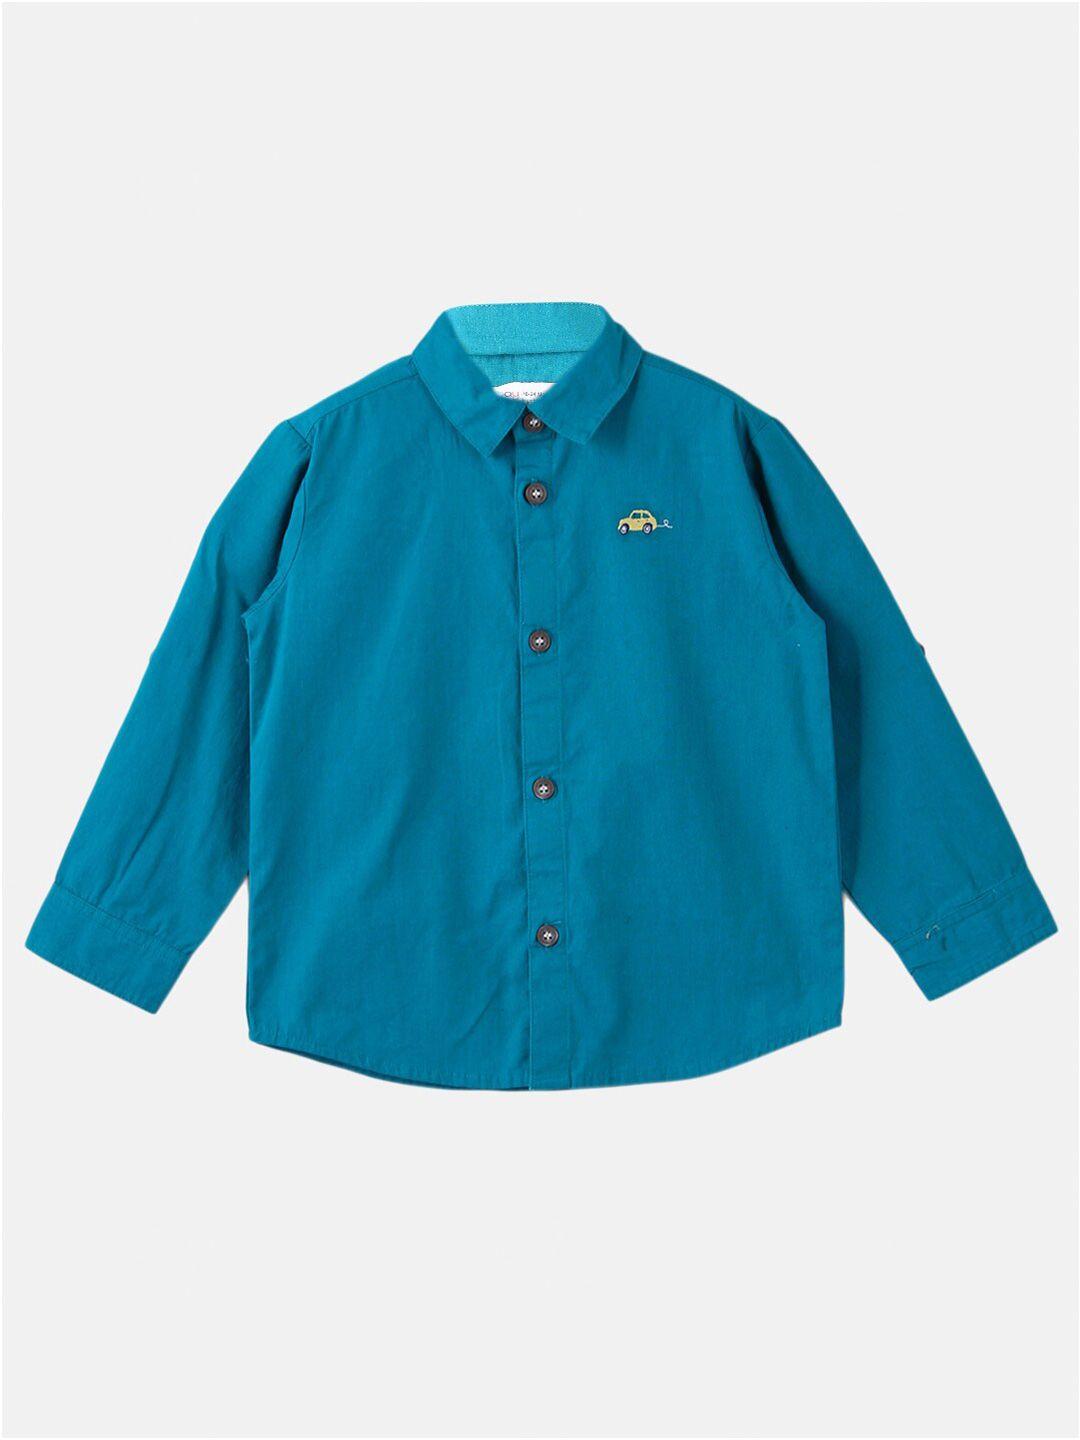 beebay boys teal blue solid cotton casual shirt